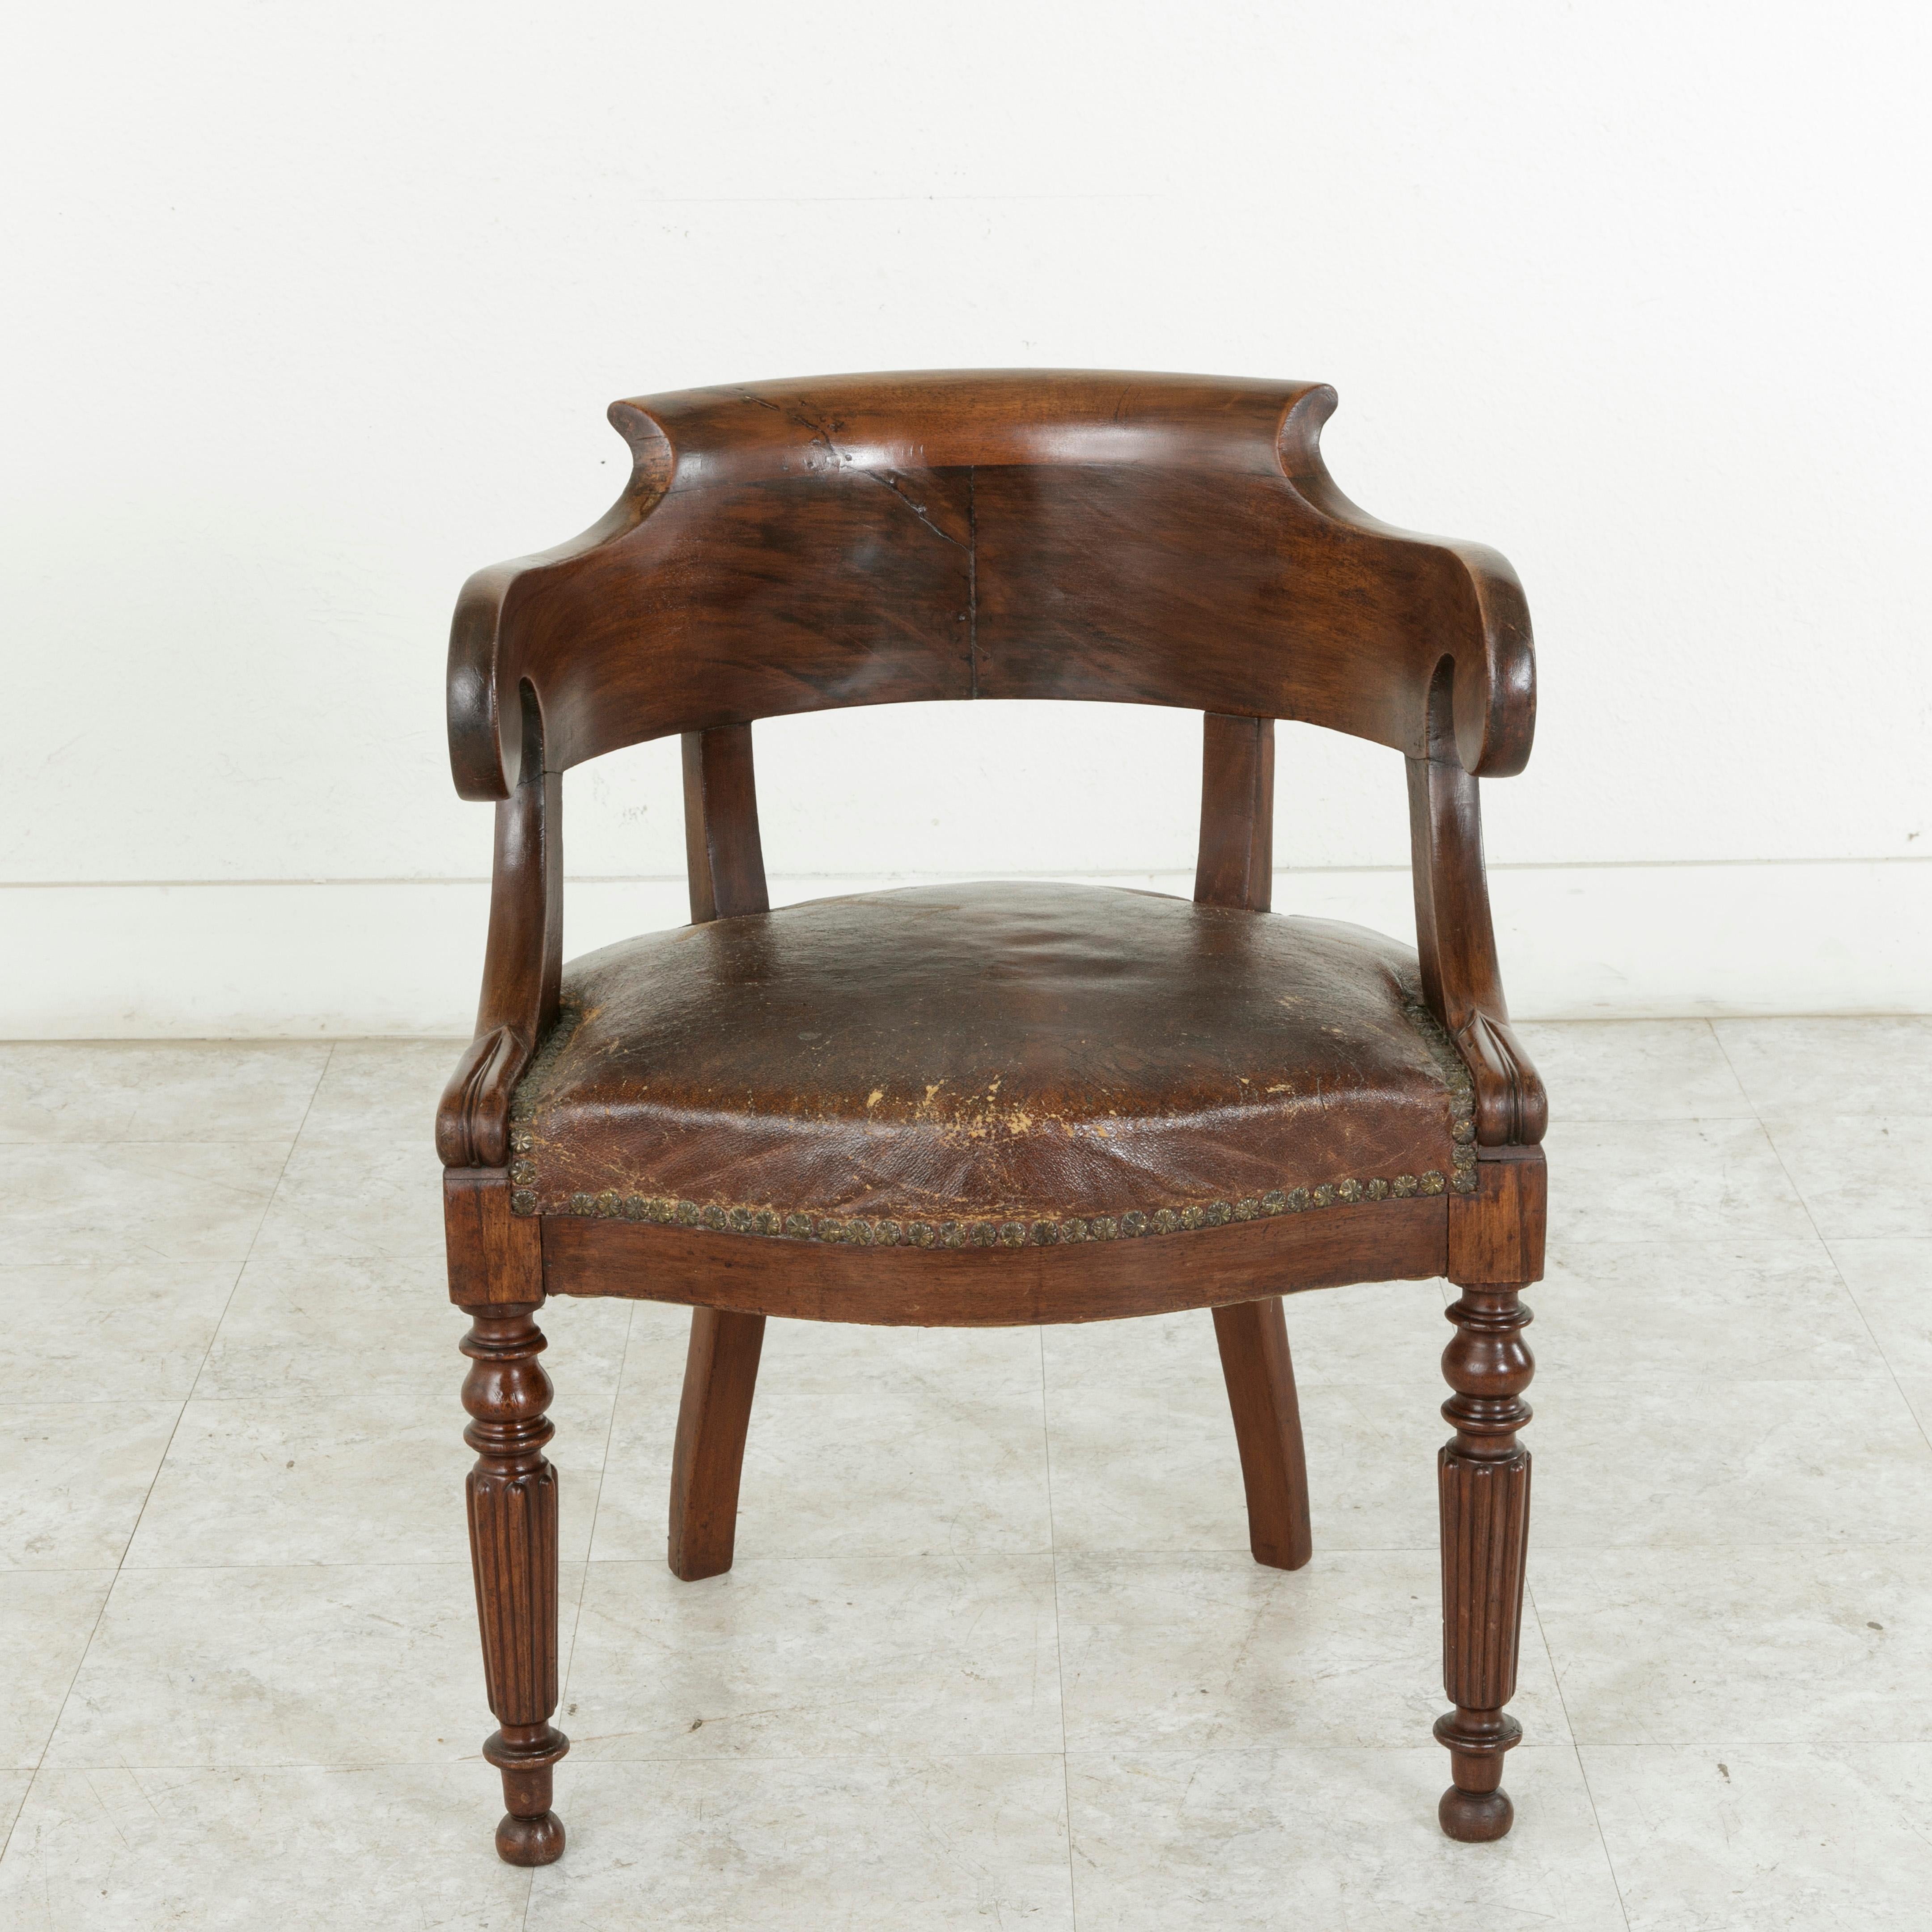 Late 19th Century French Walnut Armchair or Desk Chair with Leather Seat 1